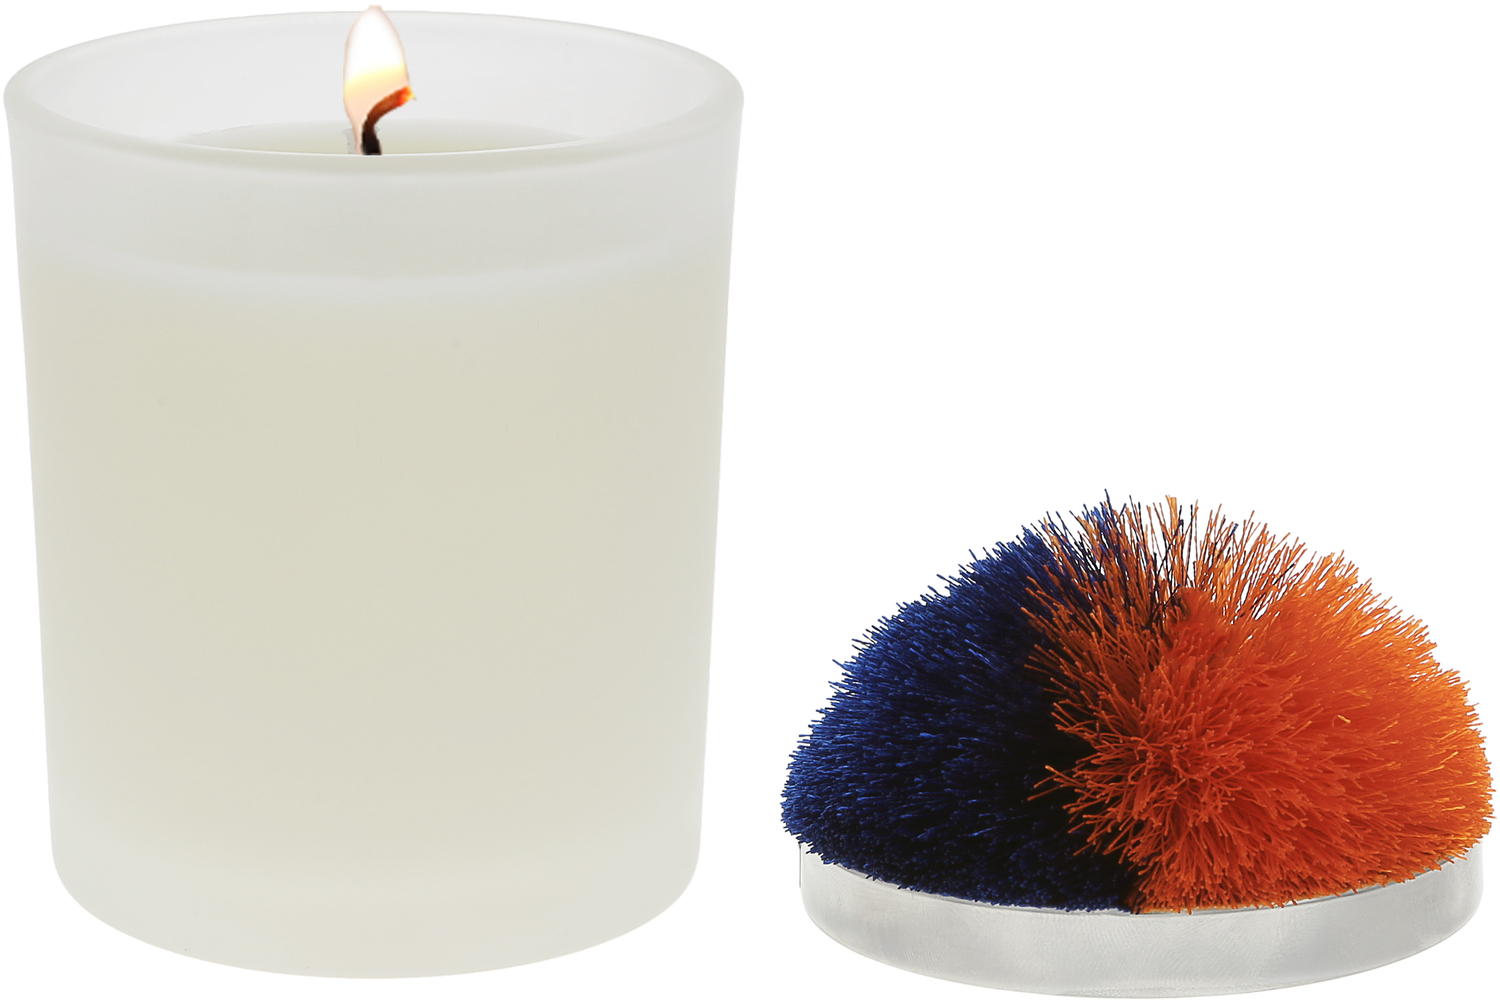 Blank - Blue & Orange by Repre-Scent - Blank - Blue & Orange - 5.5 oz - 100% Soy Wax Candle with Pom Pom Lid
Scent: Tranquility